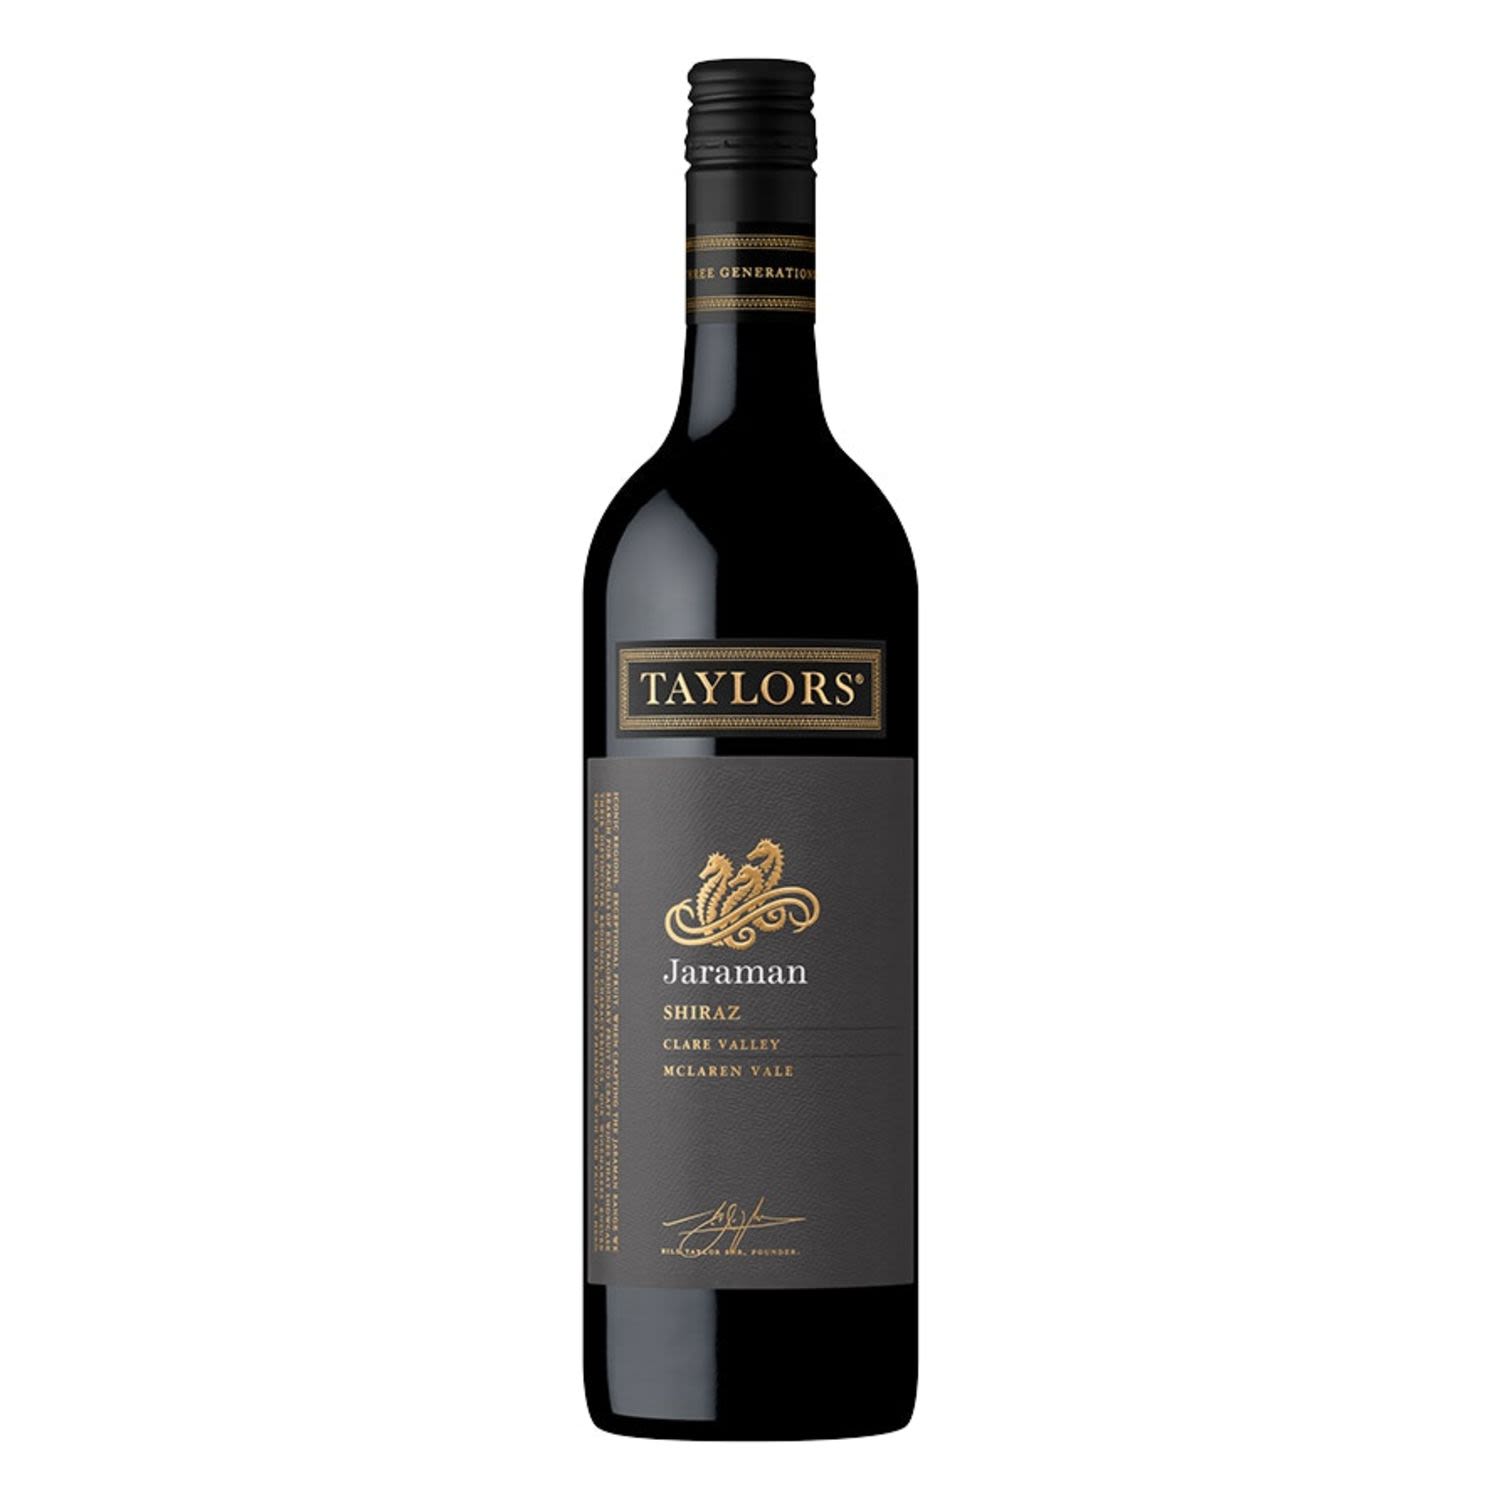 Rich and full-bodied, lifted aromas of black olive coexist with an intense palate of ripe red berry fruit and dark chocolate<br /> <br />Alcohol Volume: 14.50%<br /><br />Pack Format: Bottle<br /><br />Standard Drinks: 8.3</br /><br />Pack Type: Bottle<br /><br />Country of Origin: Australia<br /><br />Region: Clare/McLaren<br /><br />Vintage: Non Vintage<br />